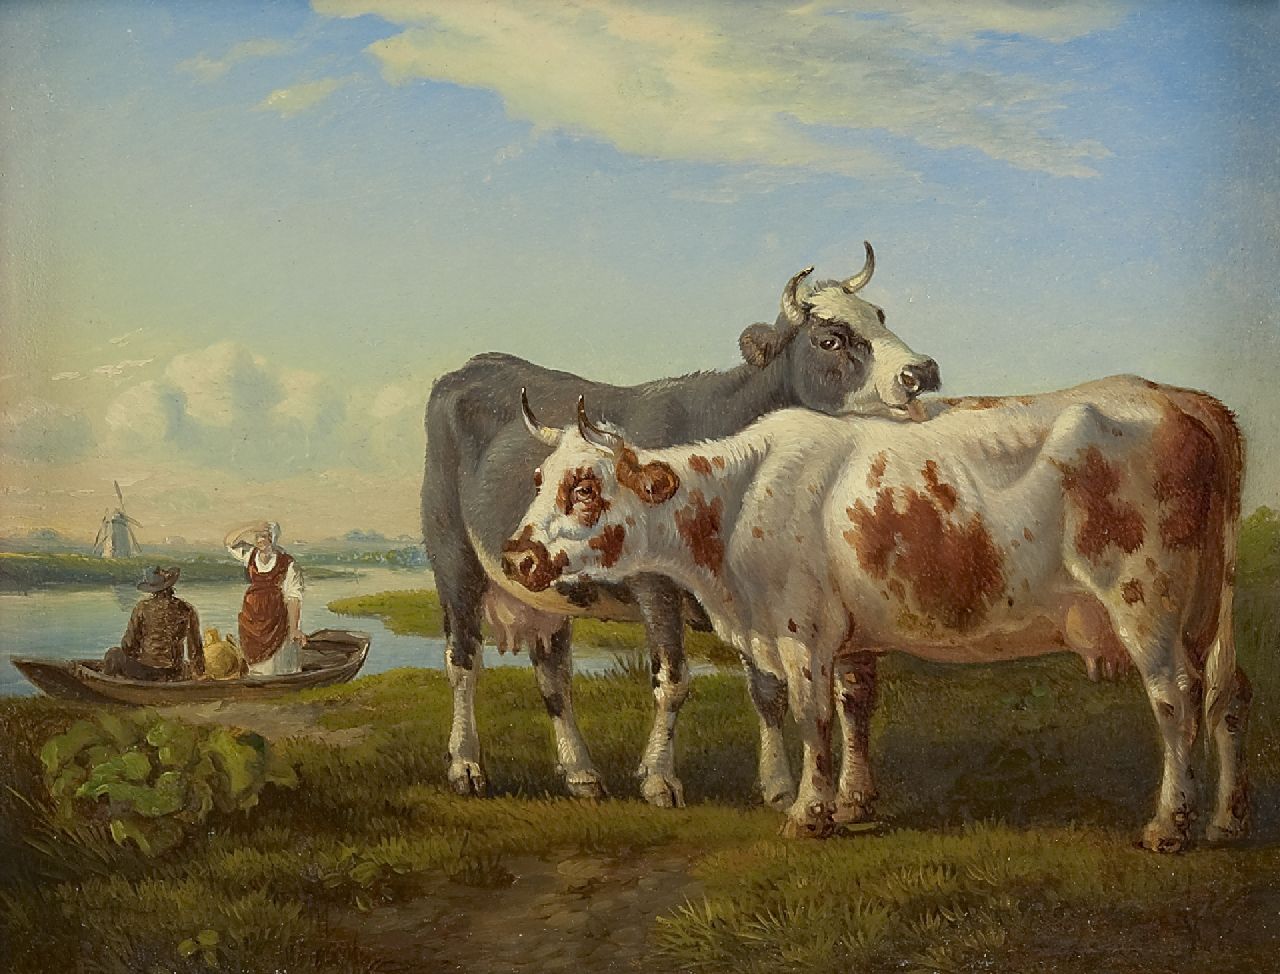 Ravenswaay J. van | Jan van Ravenswaay | Paintings offered for sale | Cows in a Dutch Arcadia, oil on panel 20.9 x 27.0 cm, signed l.r. with initials